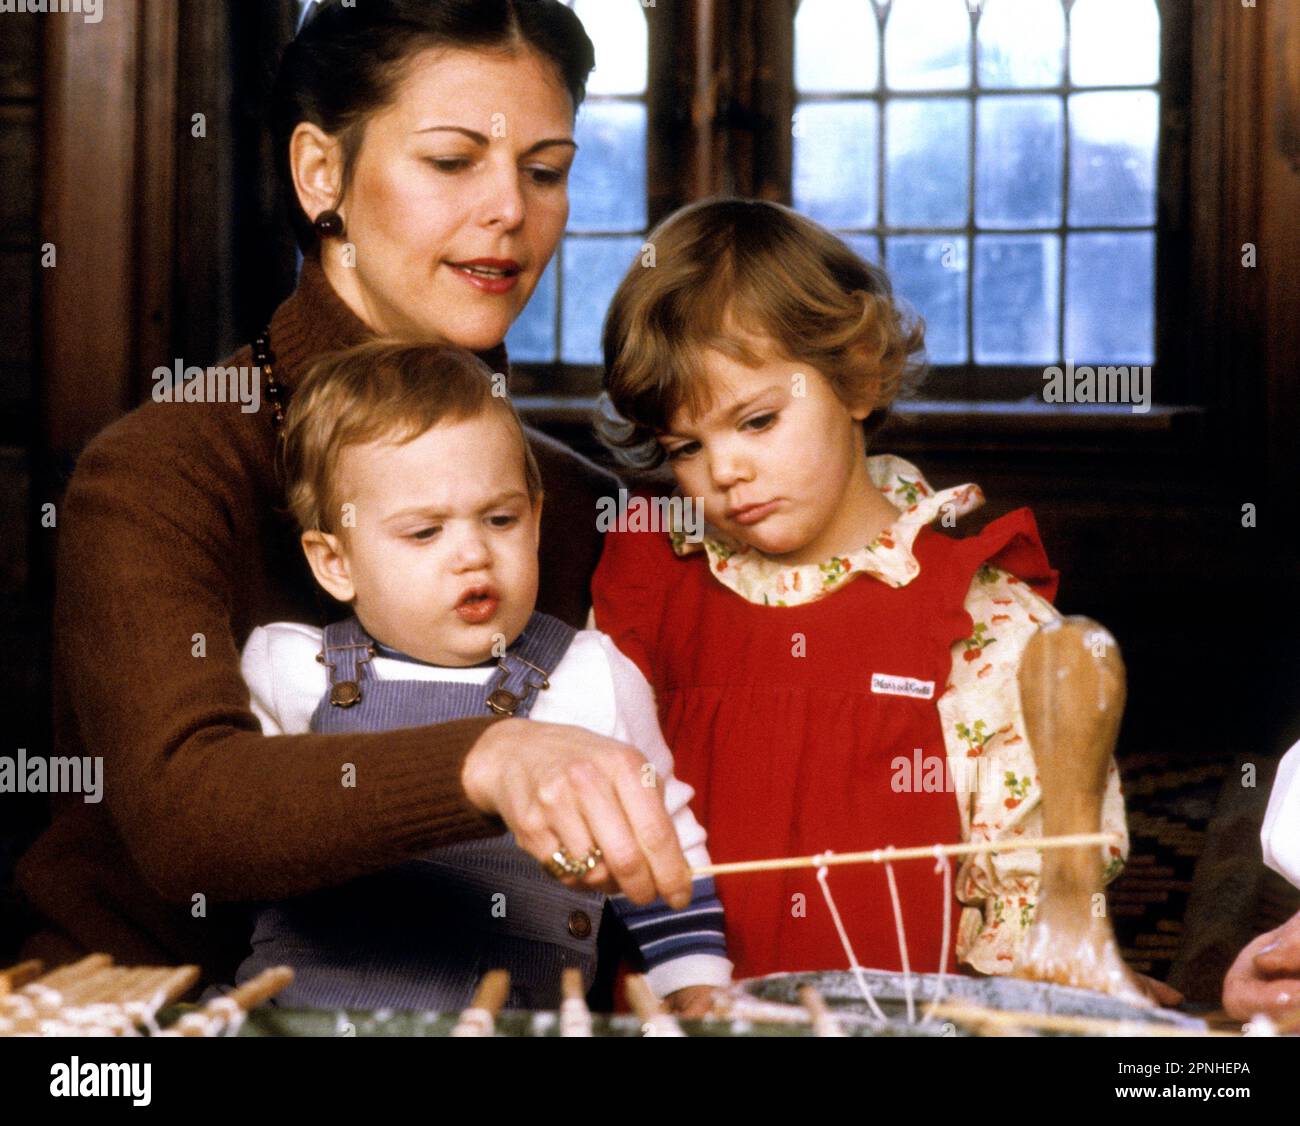 QUEEN SILVIA of Sweden with crown Princess Victoria and Prince Carl Philip at Skanse outdoor museum Christmas crafts with candle castings Stock Photo